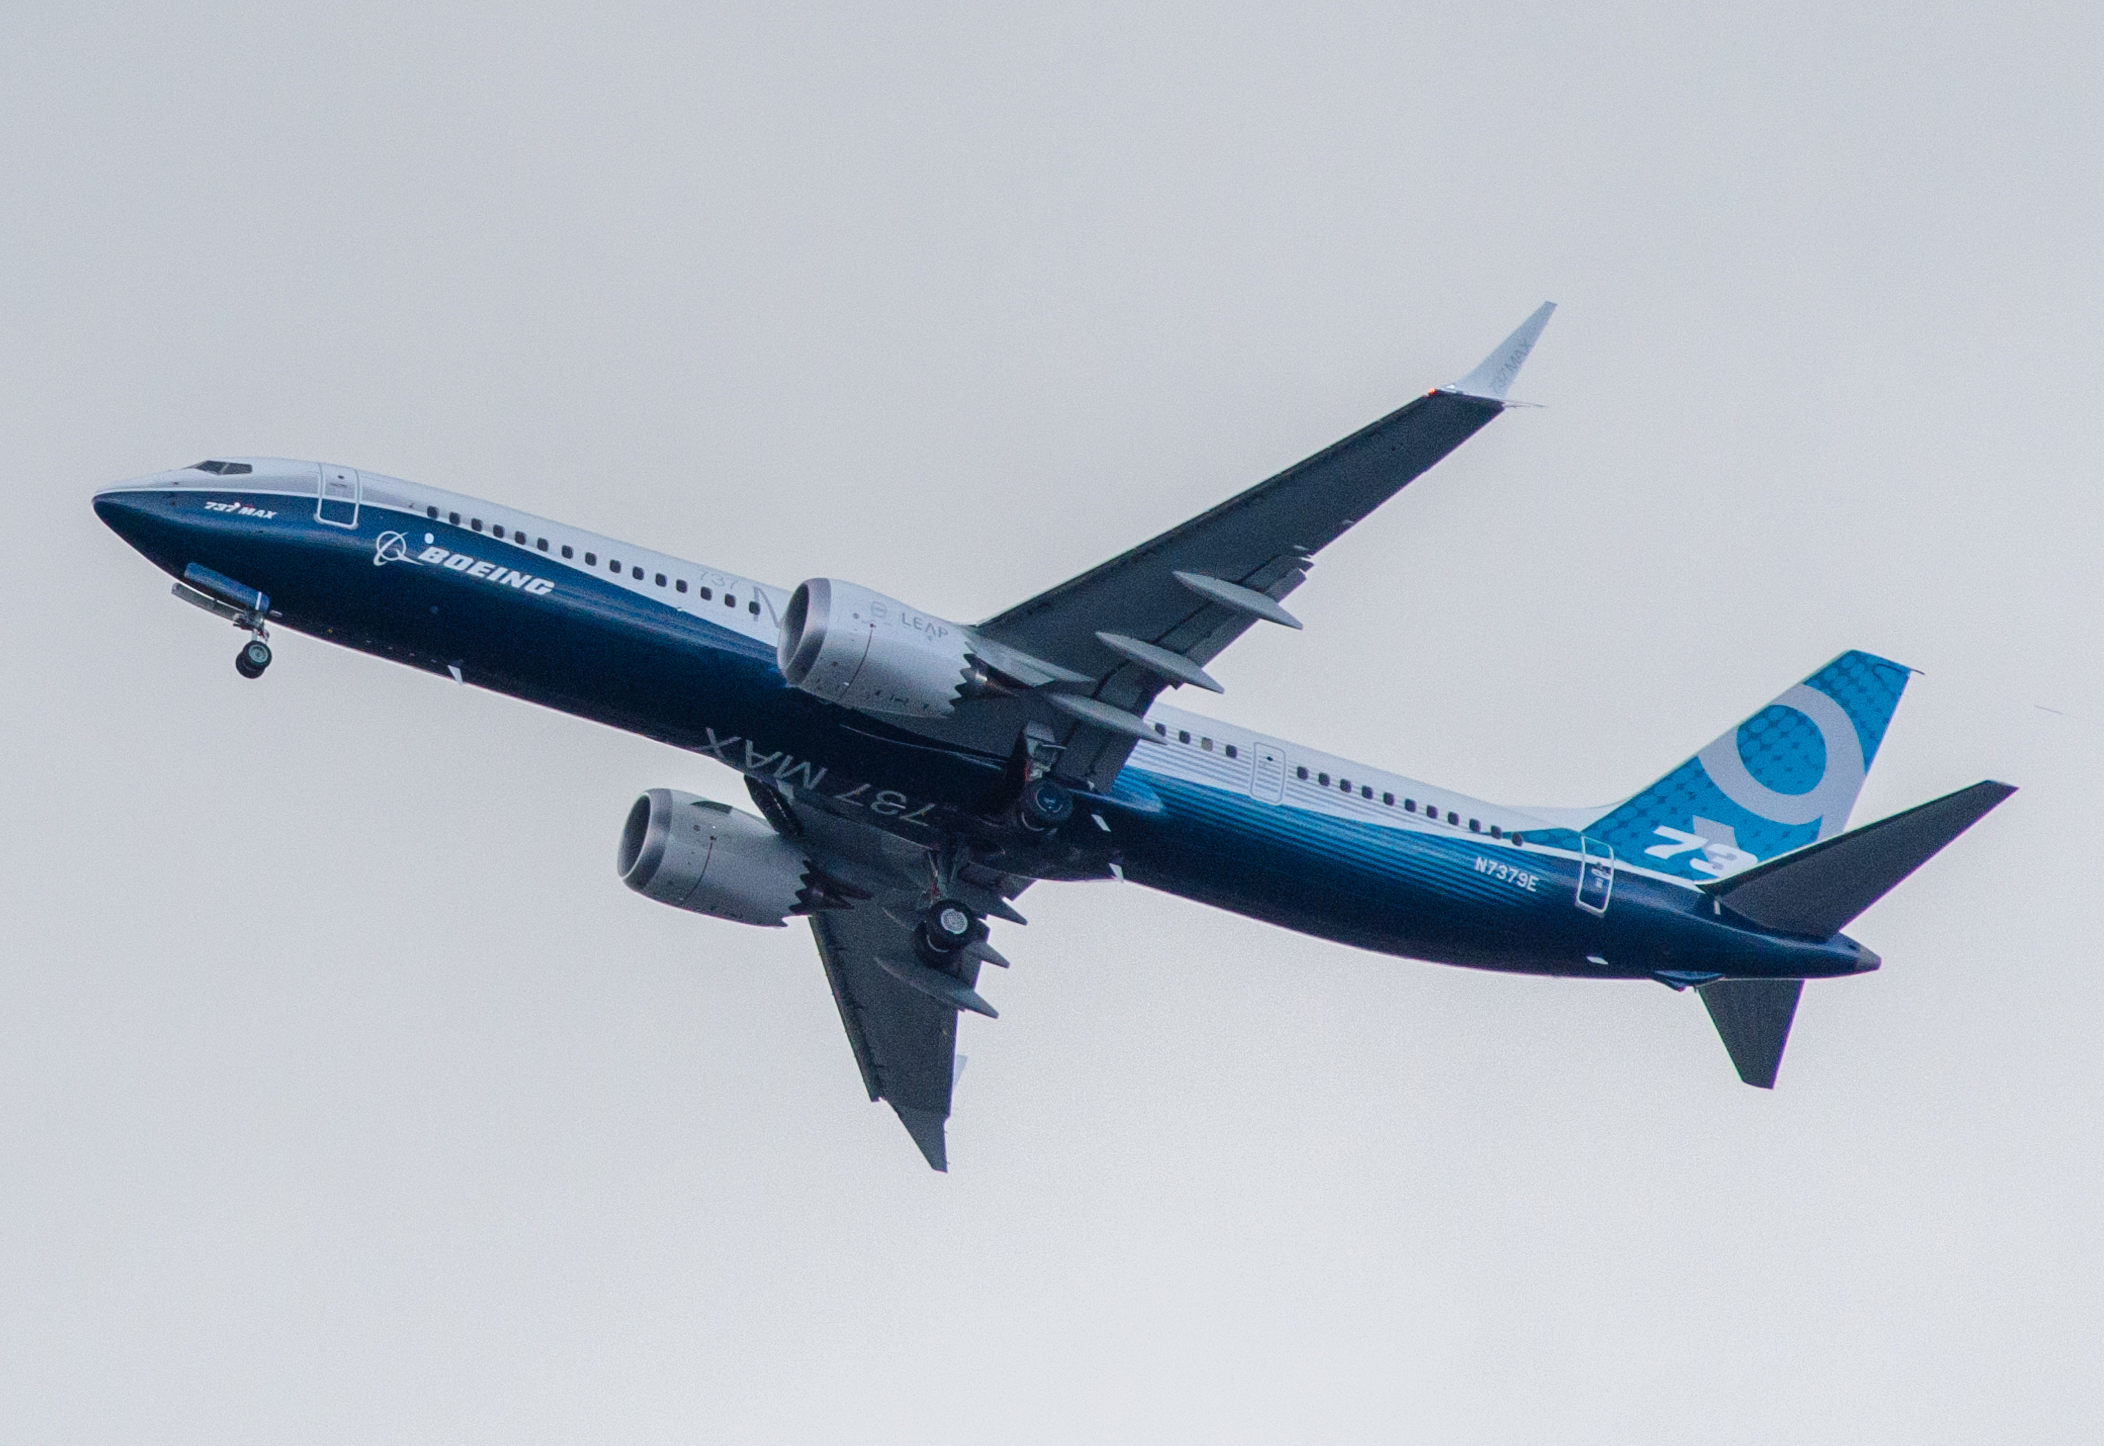 Boeing confident of safety in 737 MAX after deadly crash